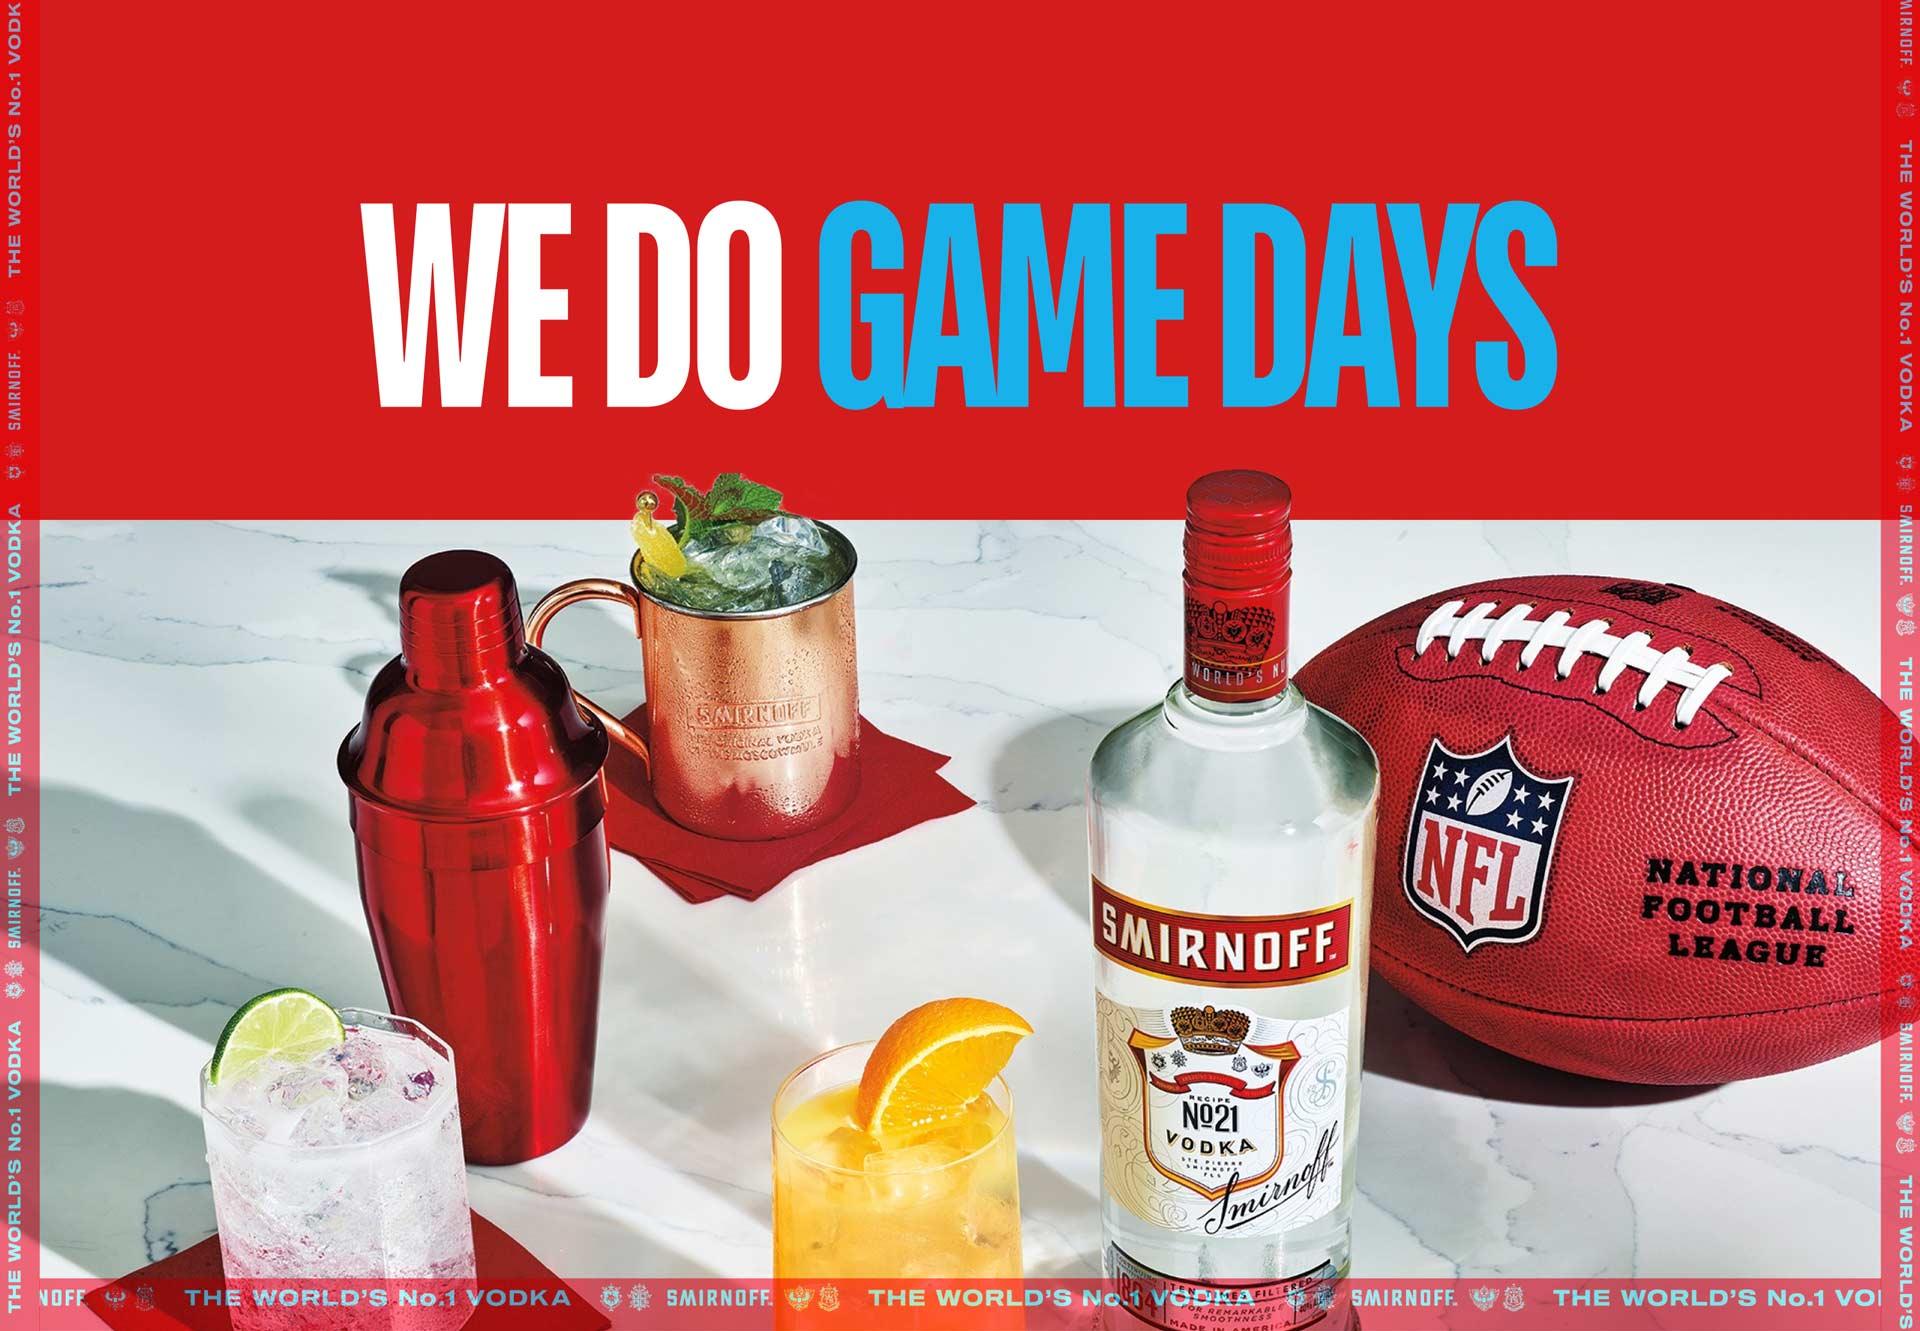 Promotion image for Smirnoff We Do Game Days Sweeps campaign